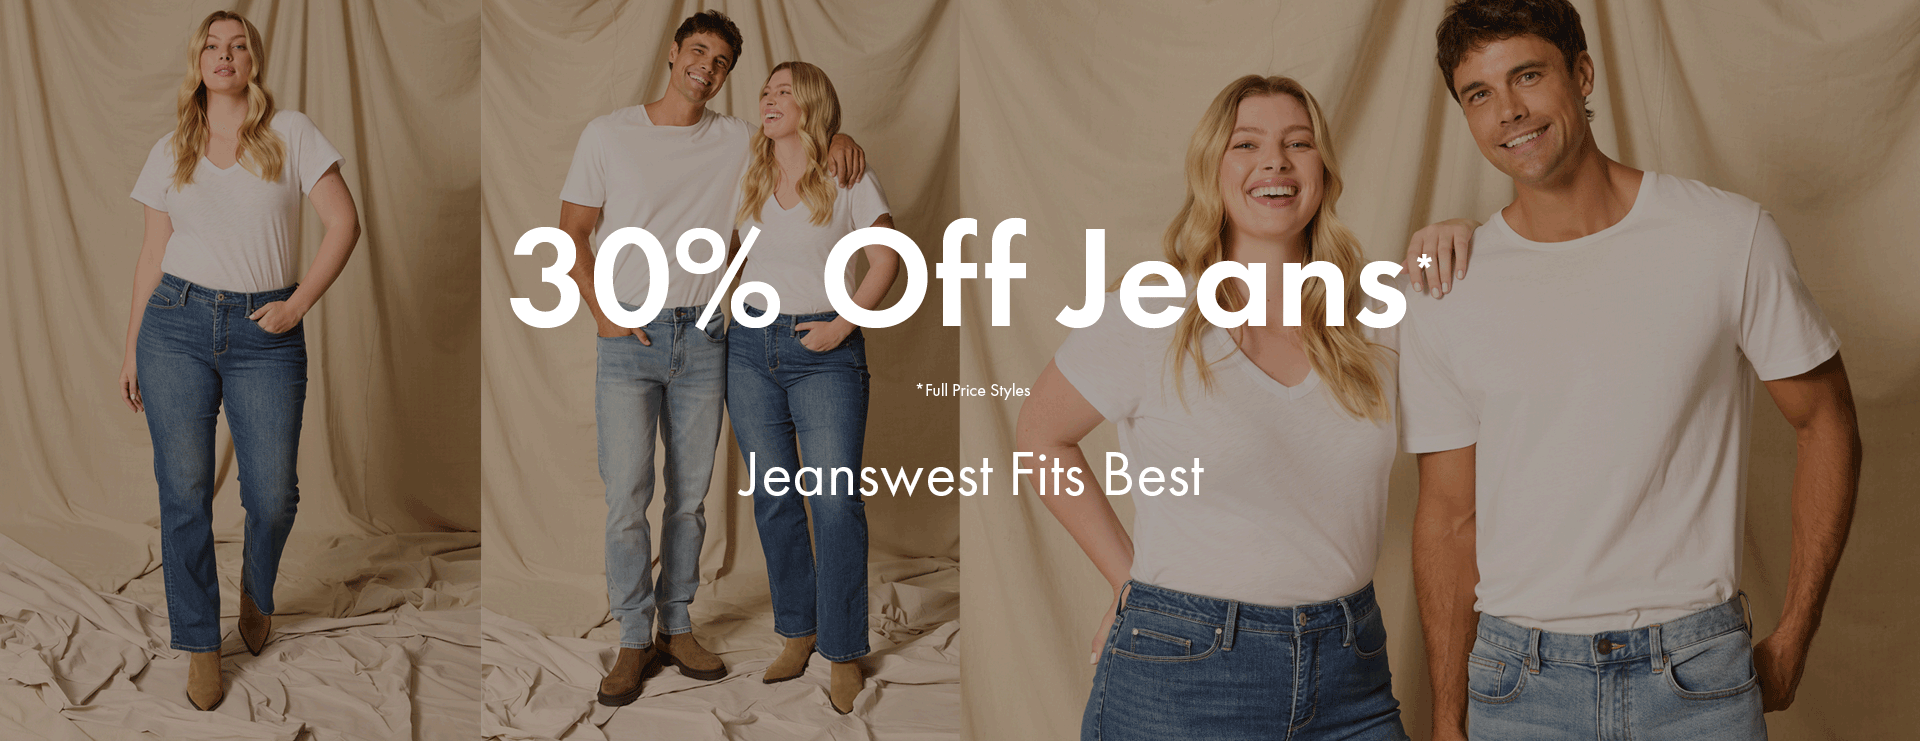 30% off Jeans*